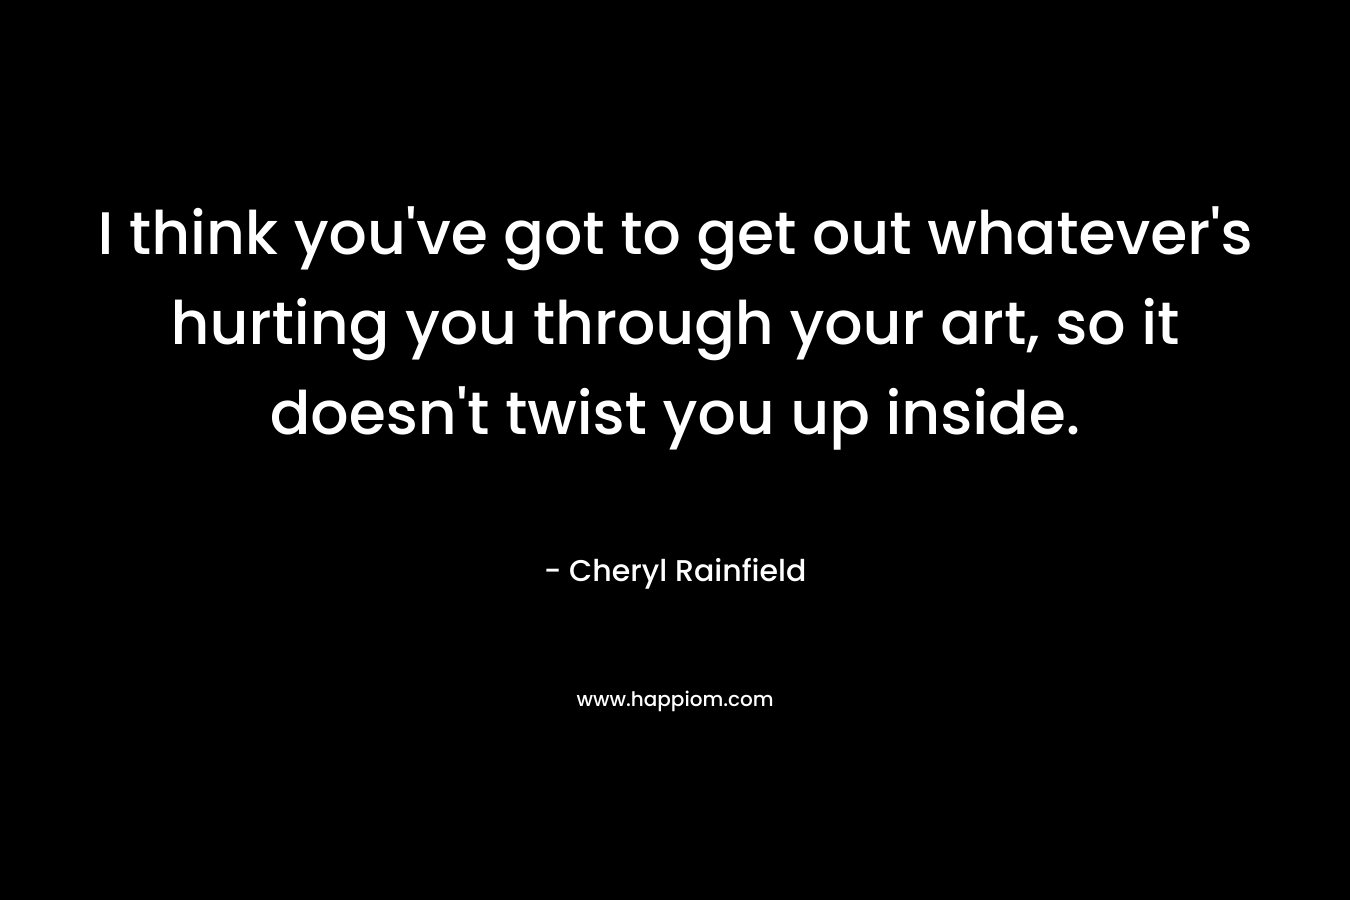 I think you’ve got to get out whatever’s hurting you through your art, so it doesn’t twist you up inside. – Cheryl Rainfield